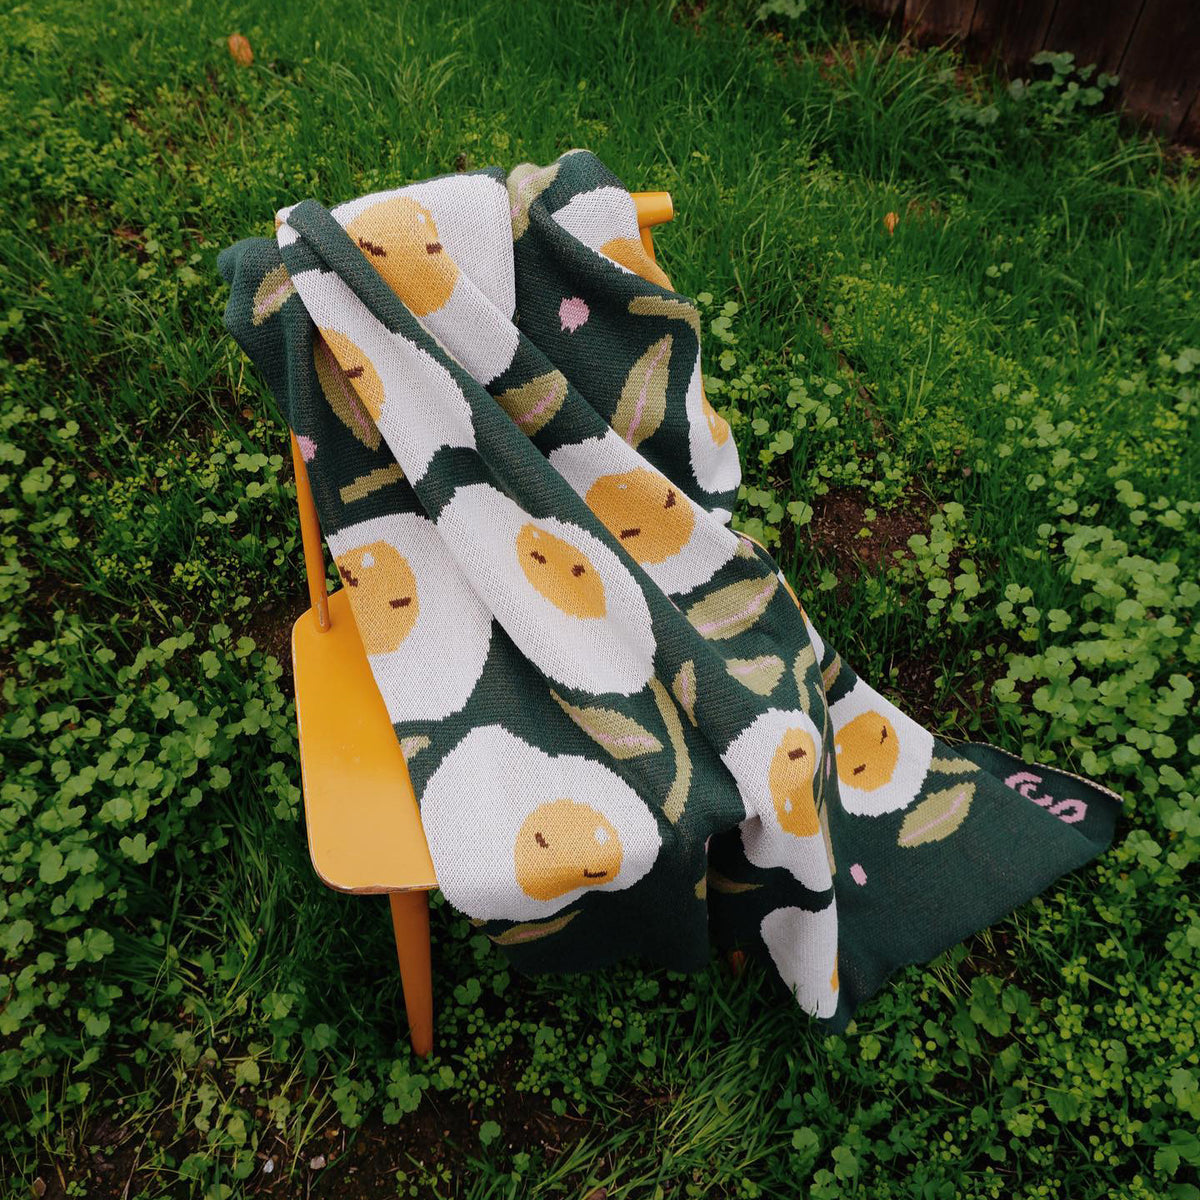 Green sunnyside blanket propped over a yellow chair on grass